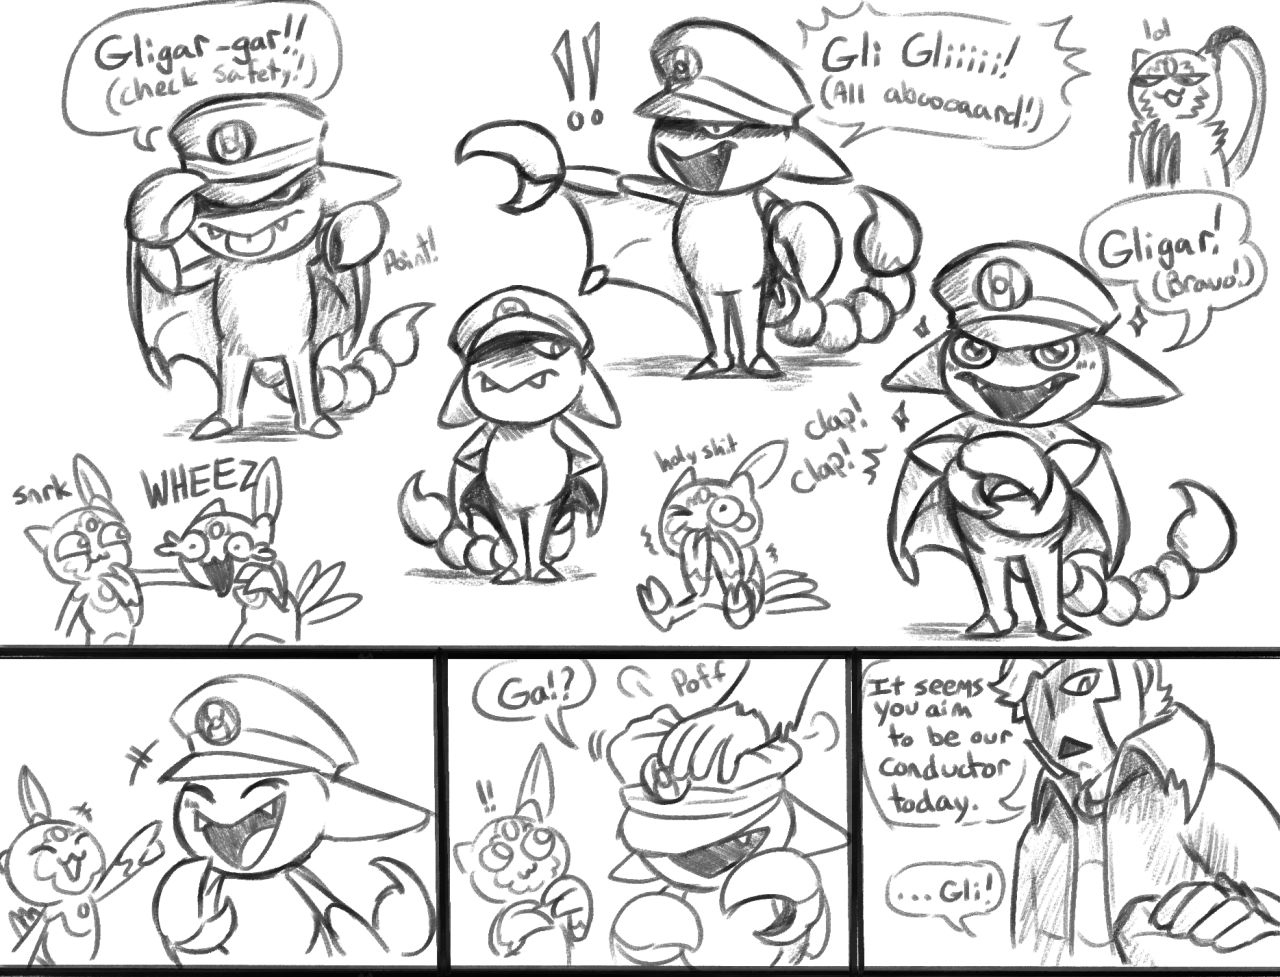 I was drawing gligar and ended up giving it Ingo’s hat. i couldnt resist continuing further and having it do Ingo impressions for the sneaslets (much to Ingo’s amusement)  #submas #subway boss ingo #gligar#pla #pokemon legends arceus  #alternatively gligar may have used the move round instead- thereby making it stronger by shouting alongside ingo  #i think ingos loudest voice should count as an attack if he wants it to  #(i love drawing hair so most often i wont draw ingo bald- but god please forgive his ratsnest hair)  #(he lives in the wilderness and wears a hat constantly of course its a mess)  #gligar is doing its very best to frown but gosh its hard